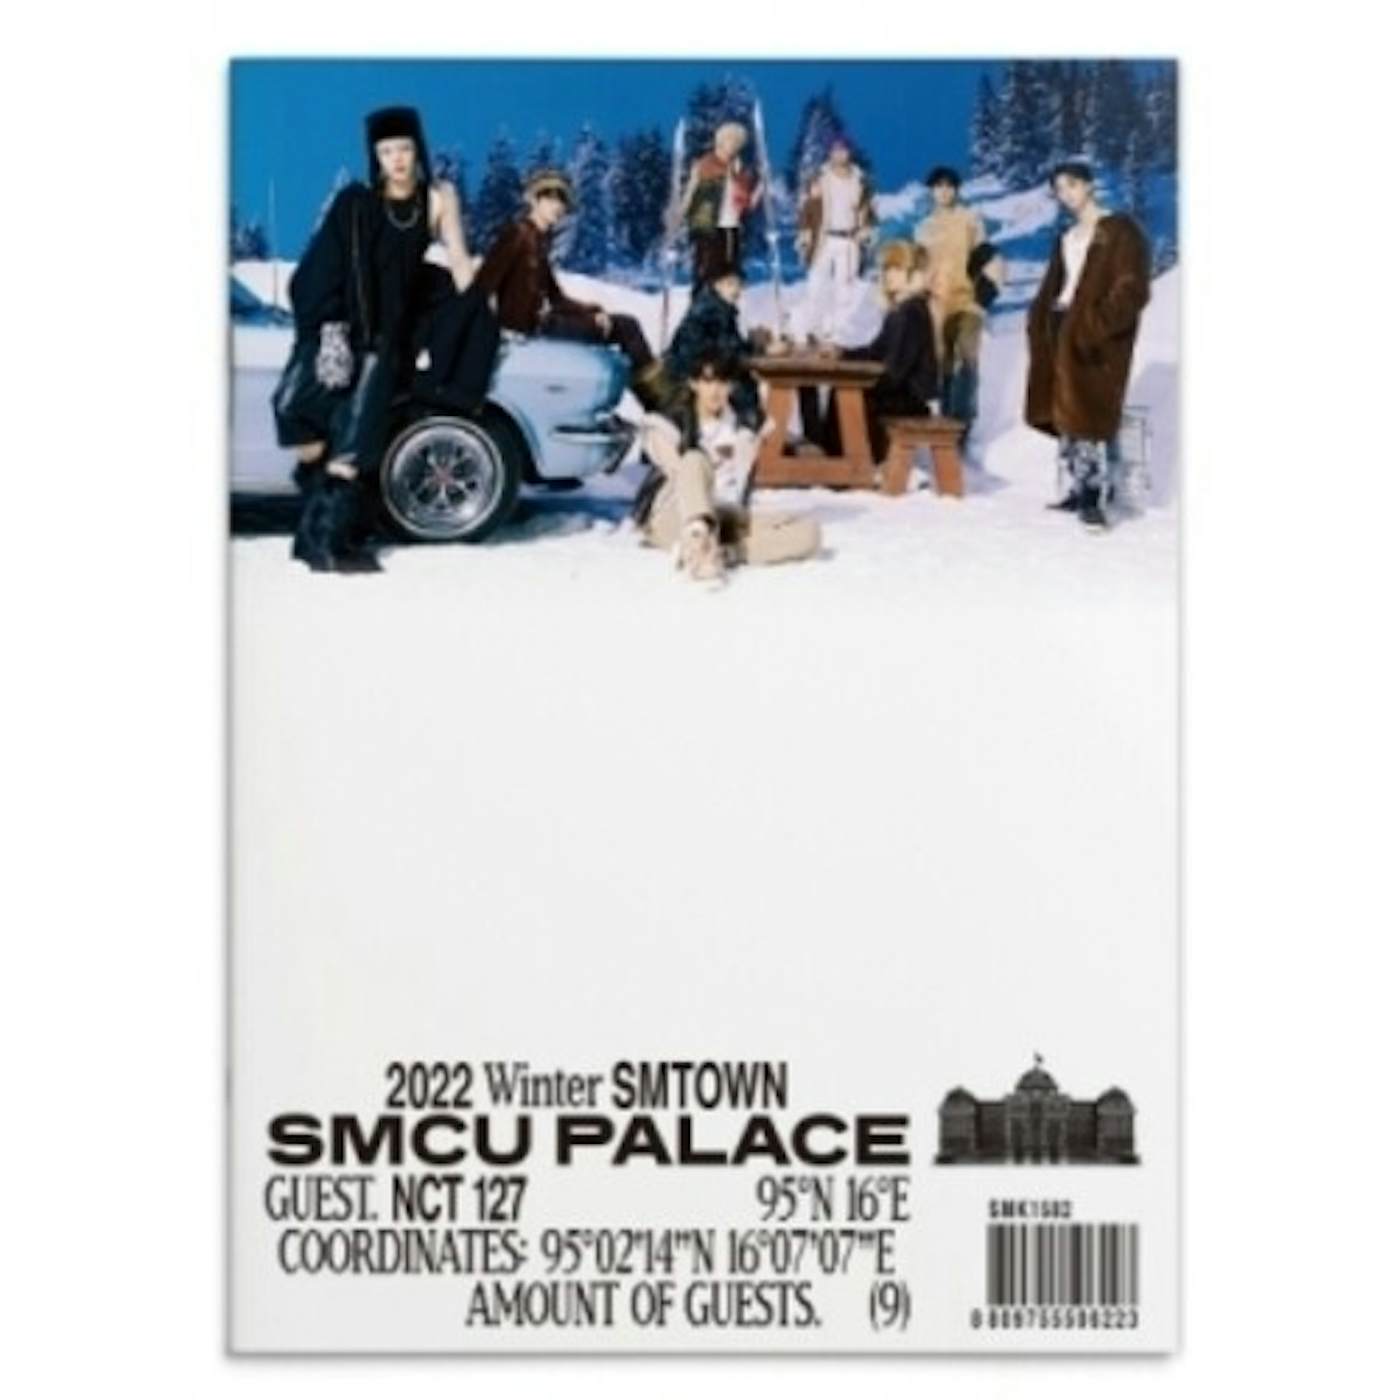 2022 WINTER SMTOWN: SMCU PALACE (GUEST. NCT 127) CD